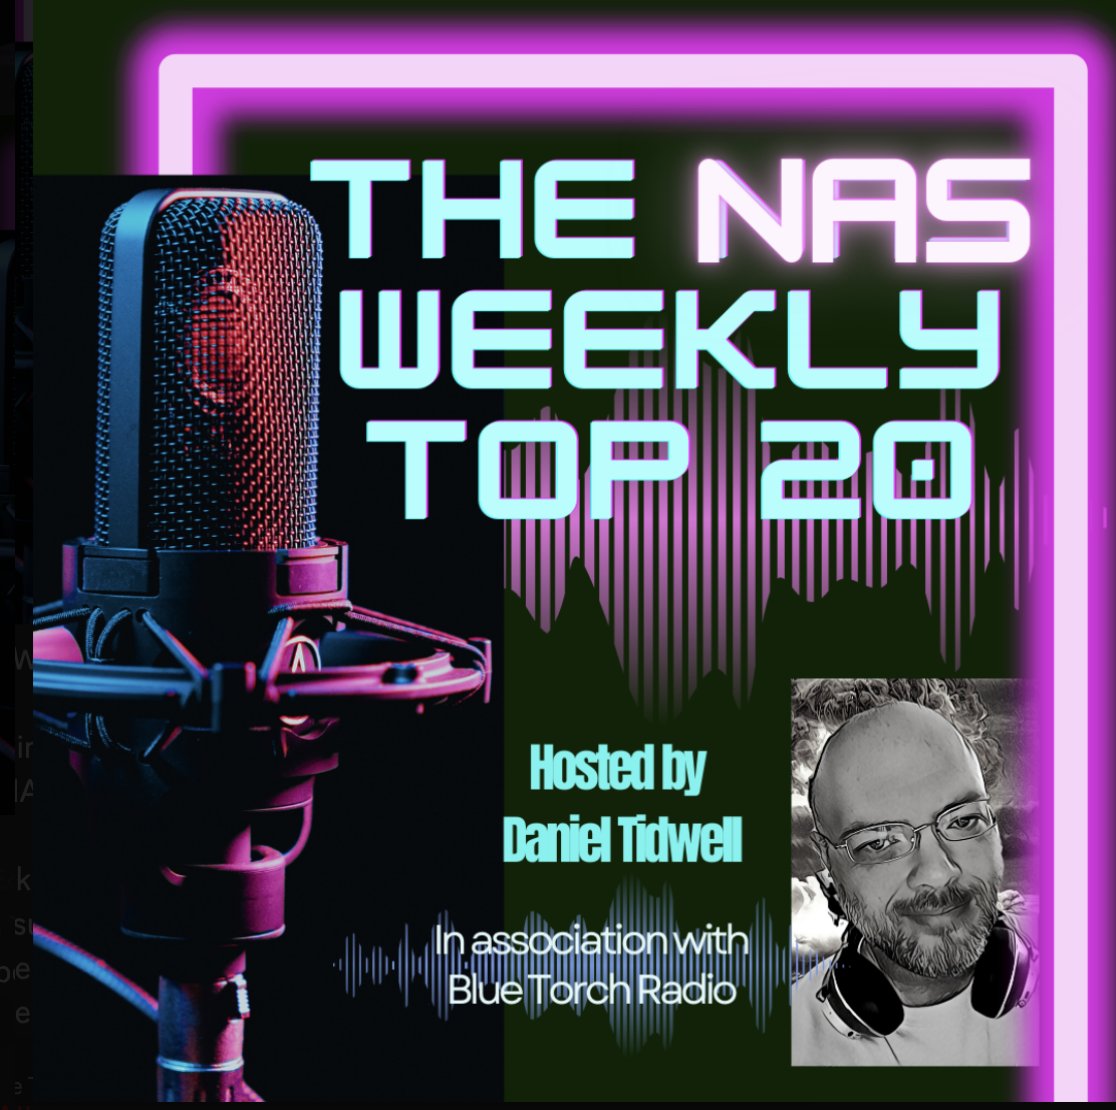 The NAS Weekly Top 20 Hosted by @DanielTidwell14
in association with Blue Torch Radio

Tune in to The NAS Weekly Top 20. Check it out 5 PM UK/Noon EST

LISTEN on #NASRadio: t.ly/I7CG1

#iwantmynas #StopPayola #indiemusic #indieartist #indieartists #top20 #musiccharts